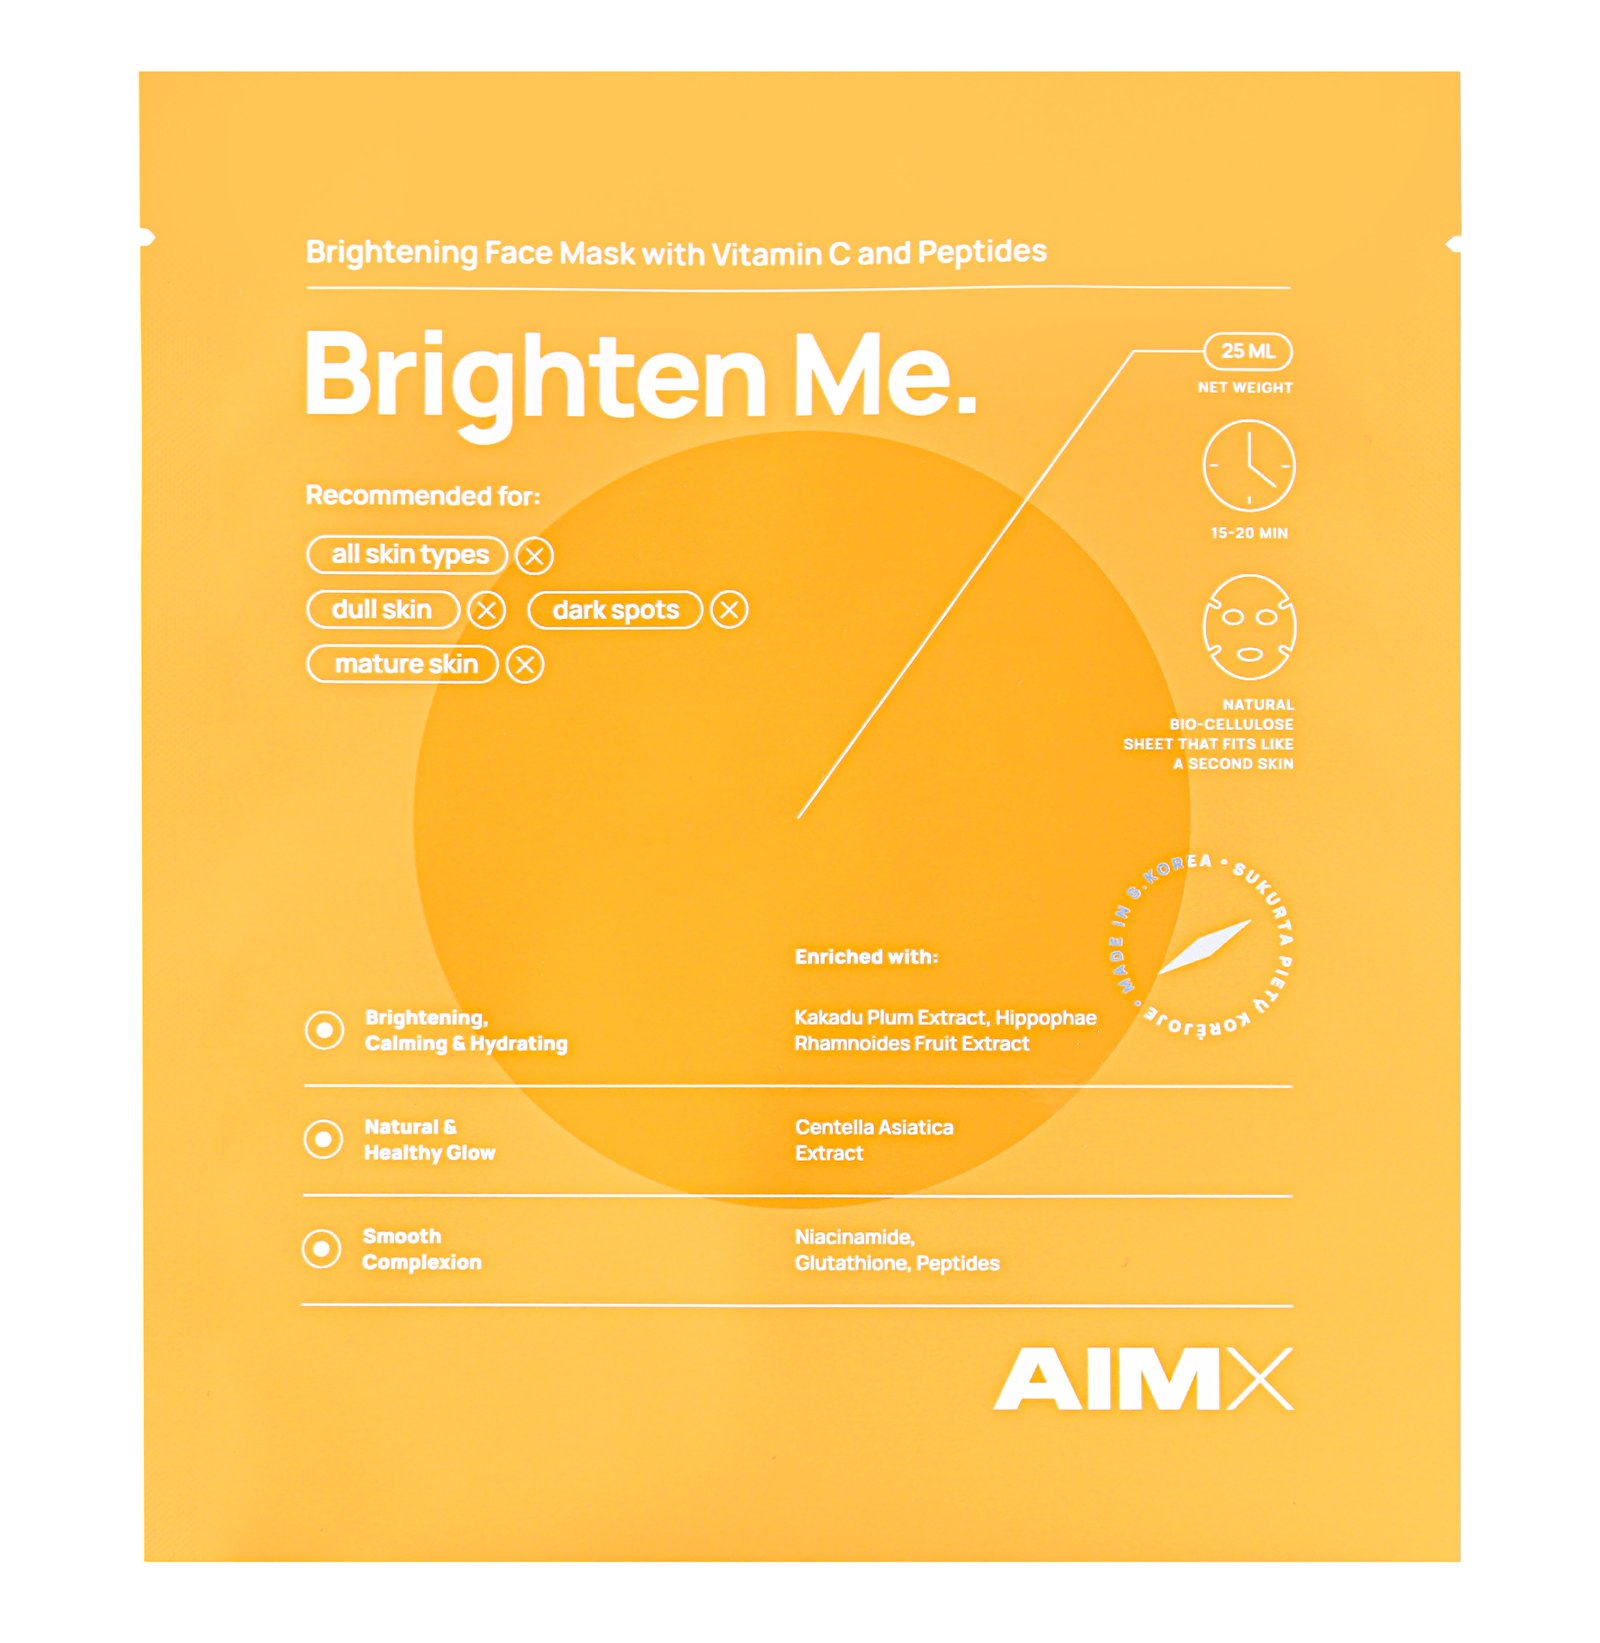 AIMX Brighten Me. Face Mask with Vitamin C & Petides 25 ml